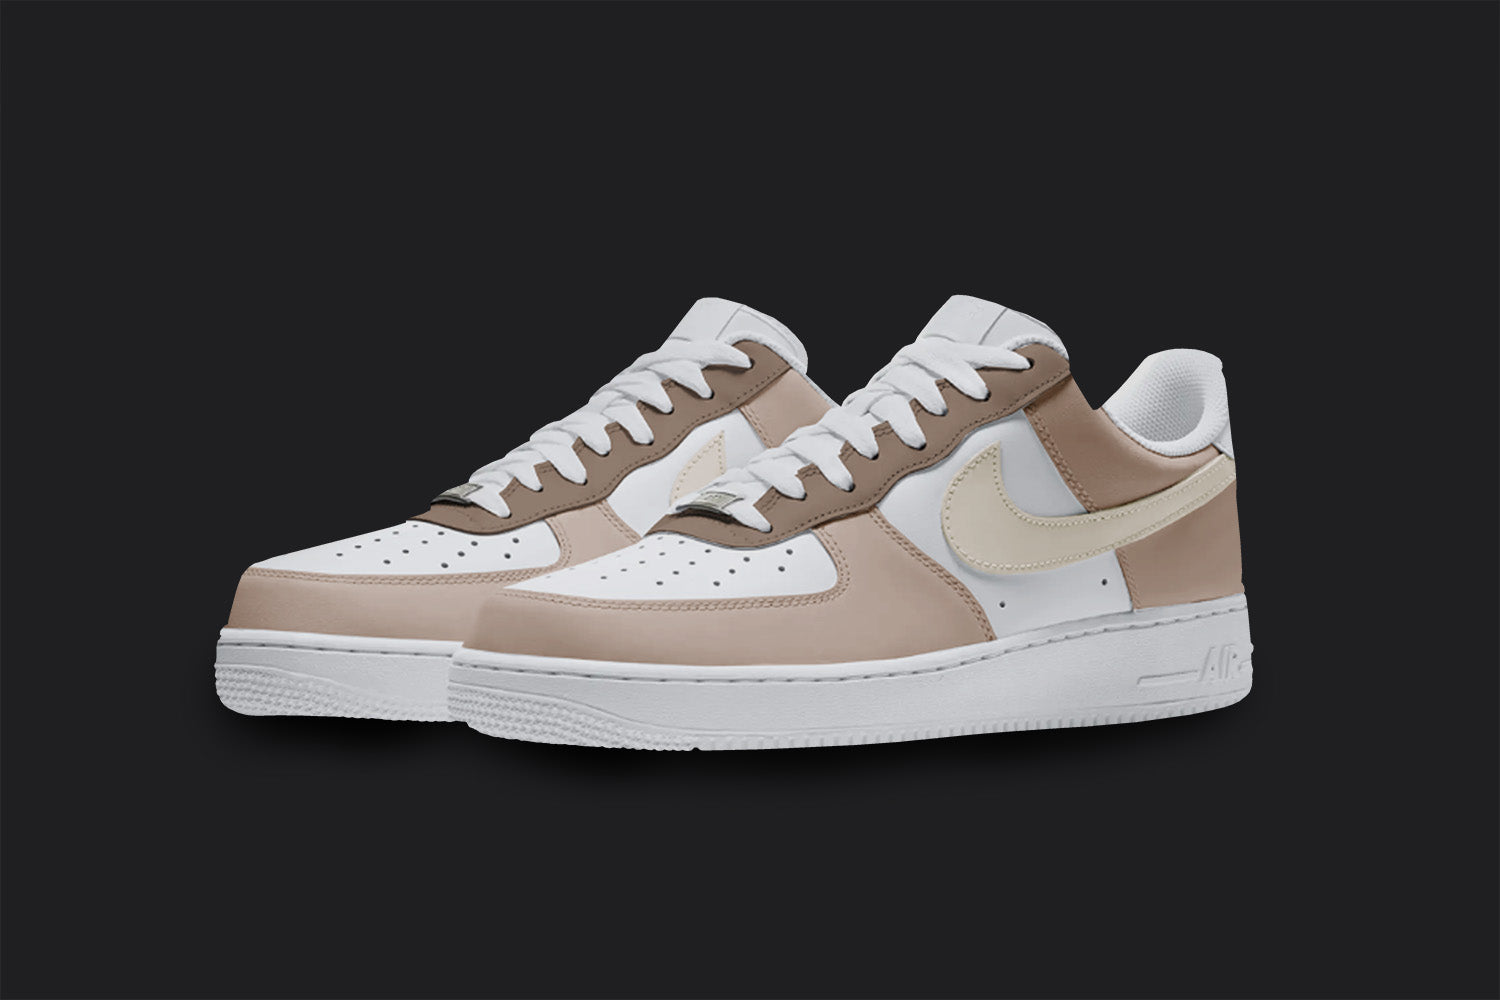 The image is of a Custom Nike Air force 1 sneaker pair on a blank black background. The custom sneakers are painted in lighter and darker brown colors. 